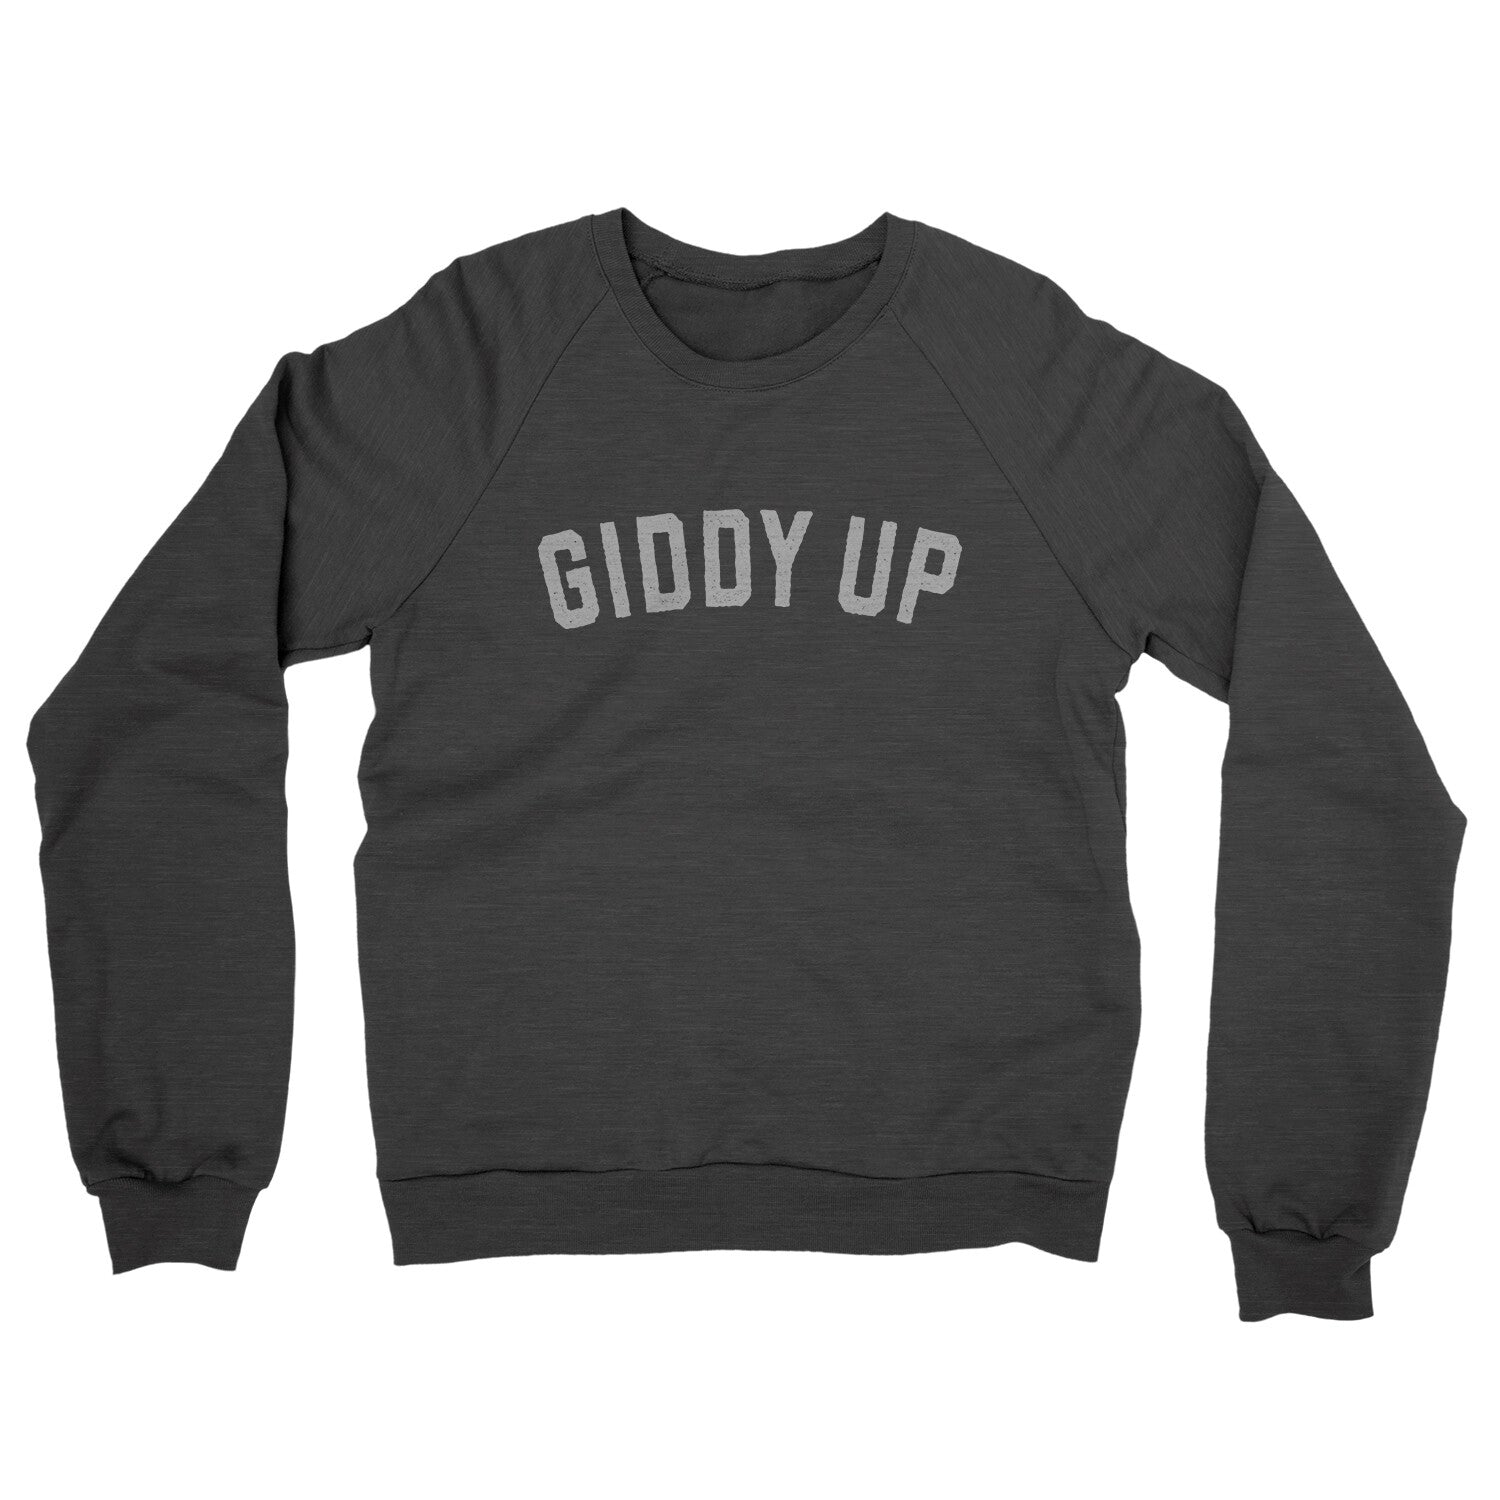 Giddy Up in Charcoal Heather Color